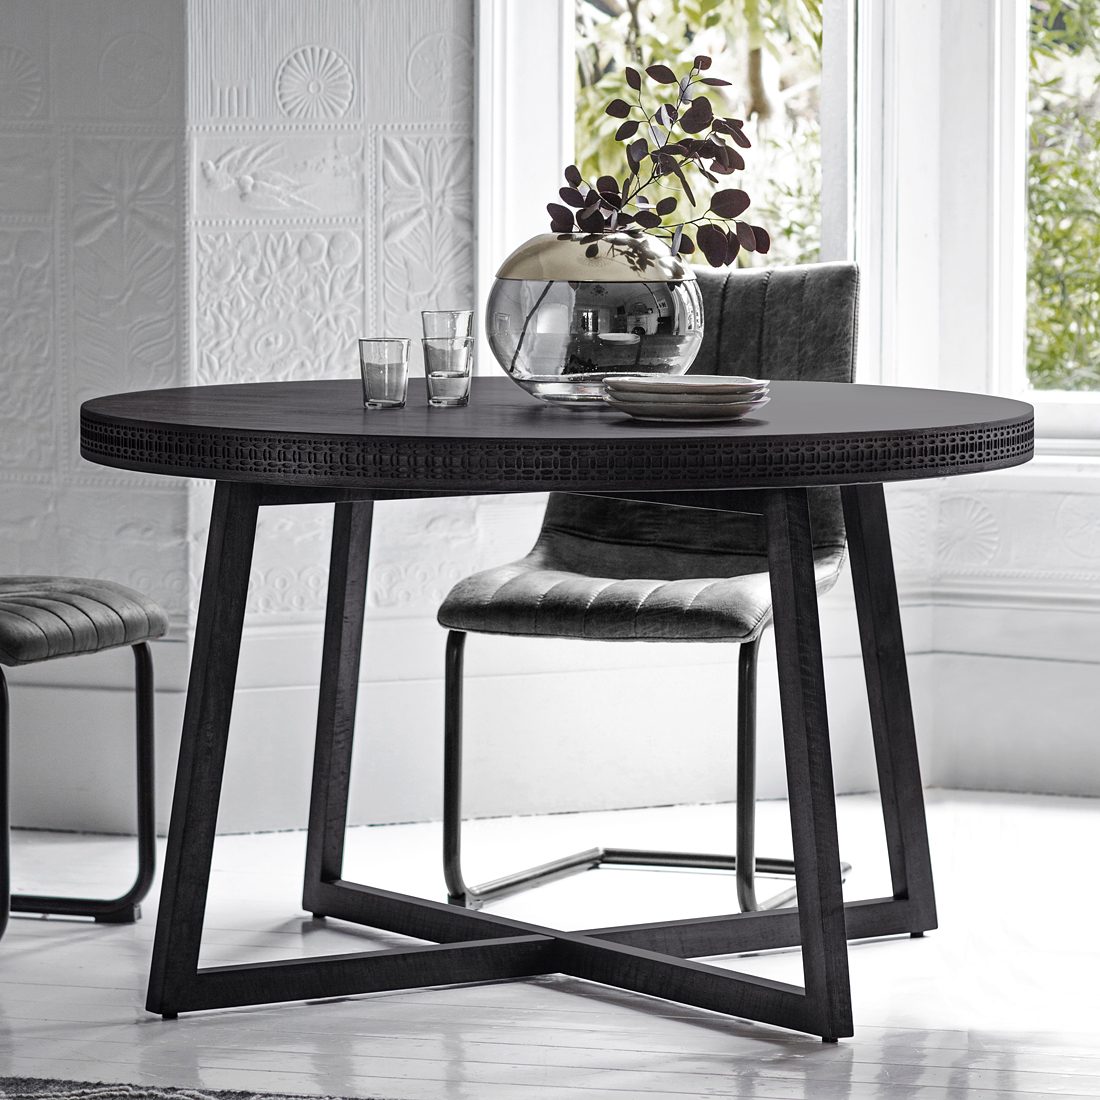 Carved Round Dining Table Black, Round Black Kitchen Table Set